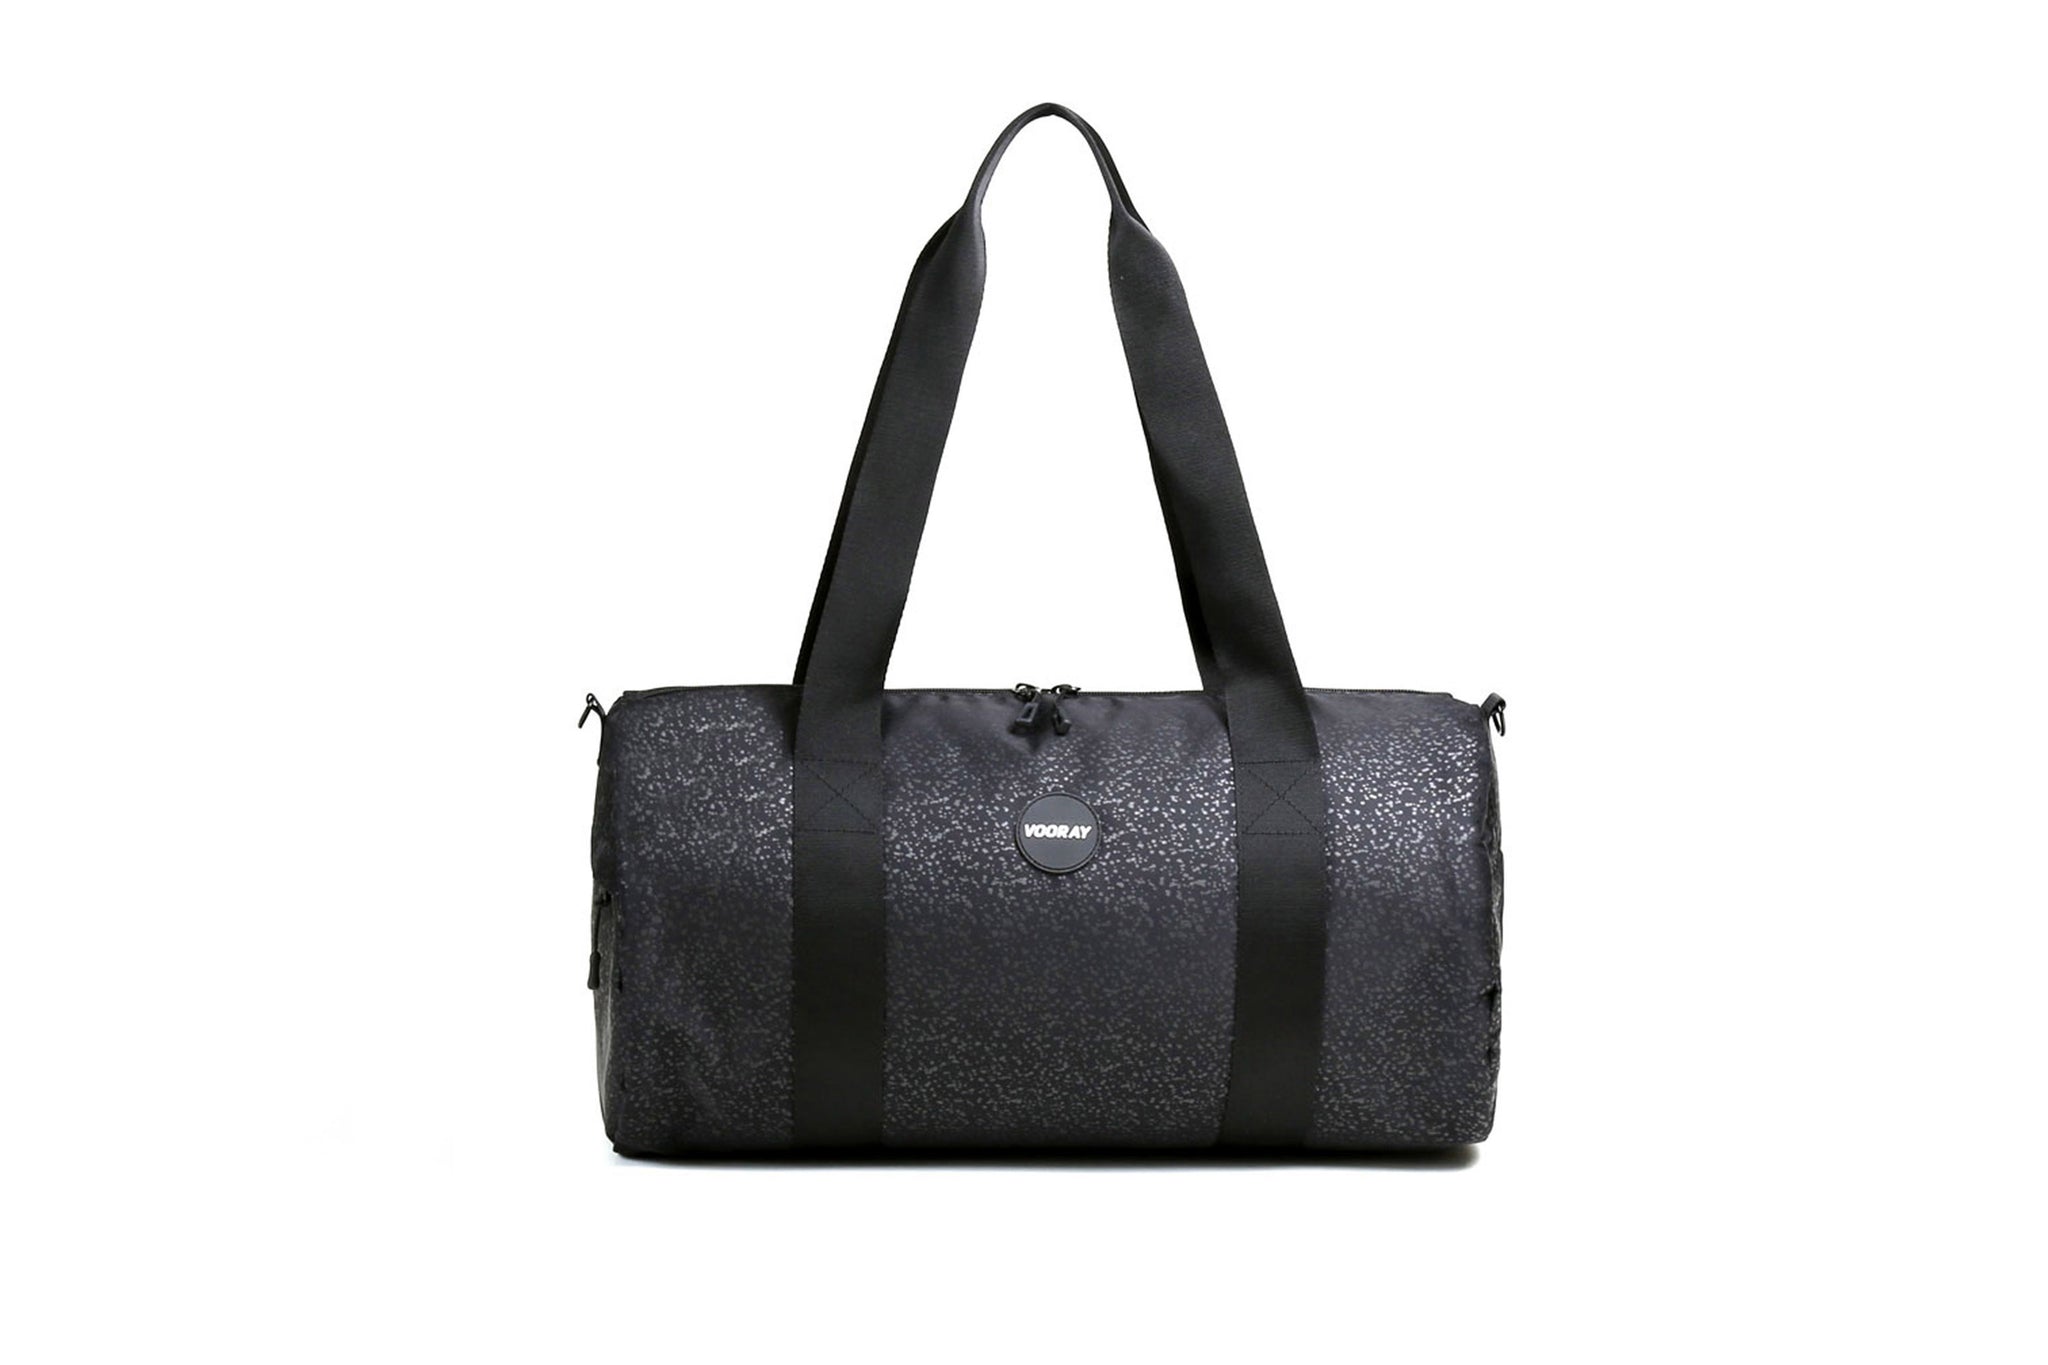 Vooray Iconic Duffel